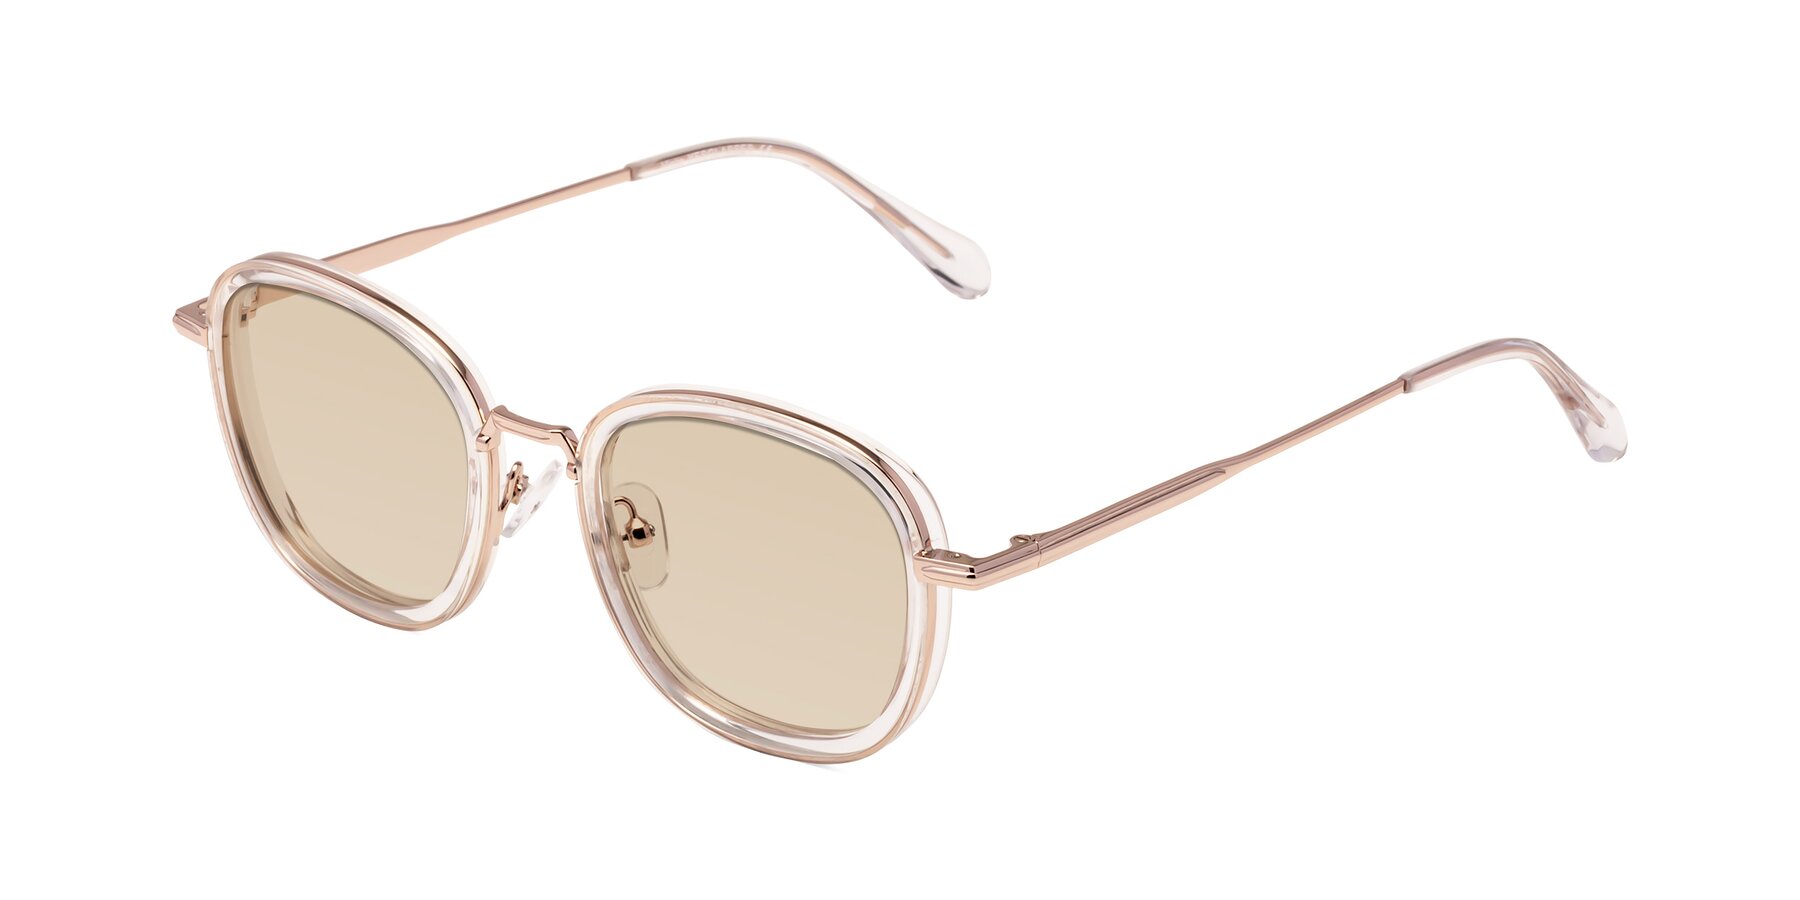 Angle of Vista in Clear-Light Gold with Light Brown Tinted Lenses